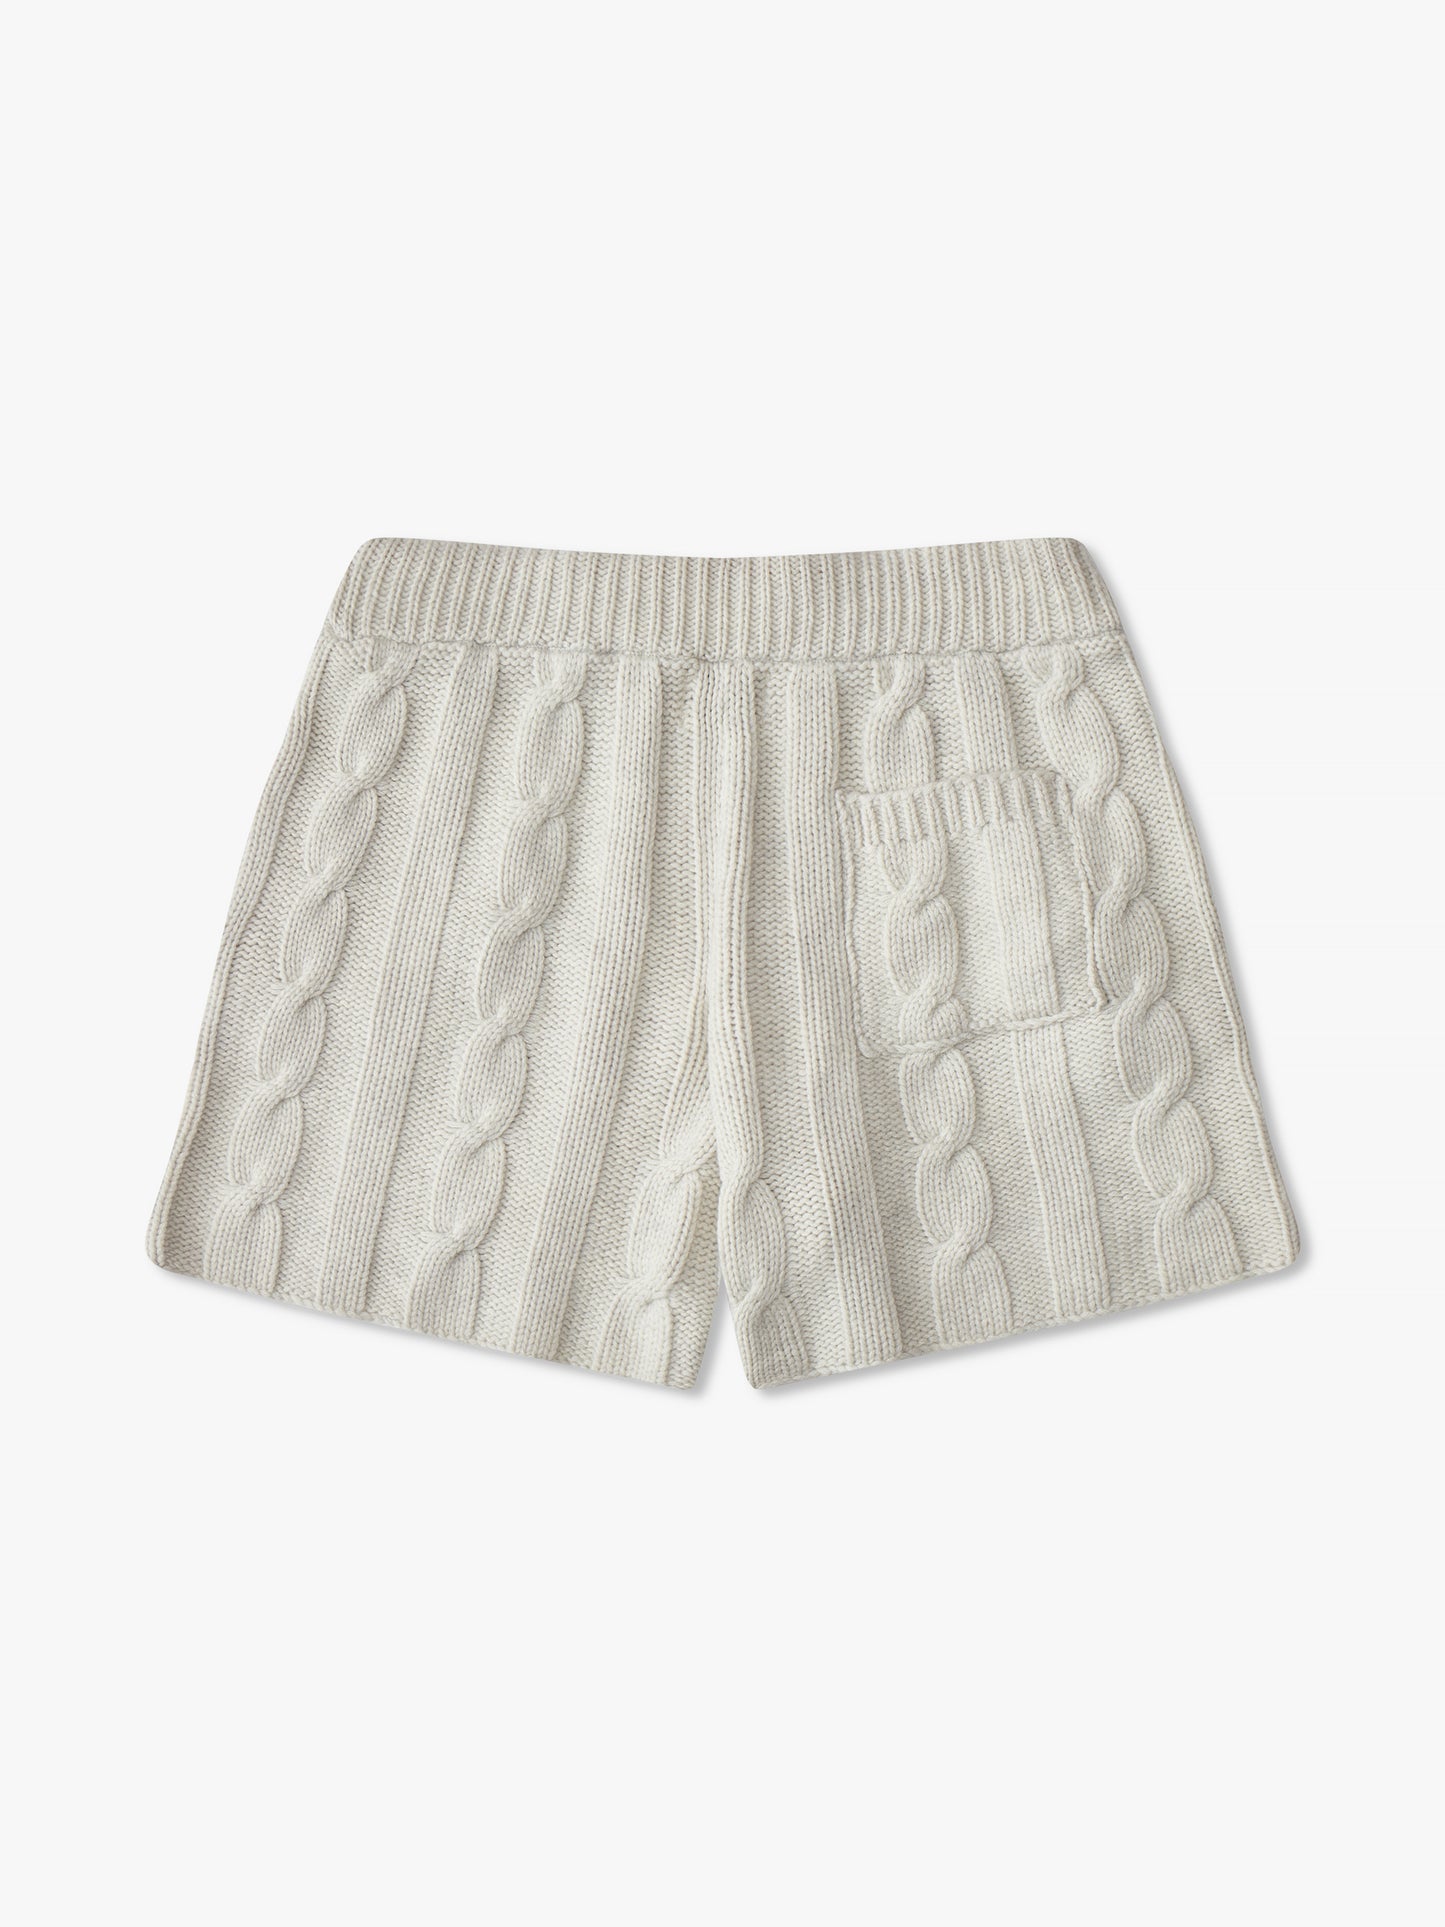 CABLE KNIT SHORTS